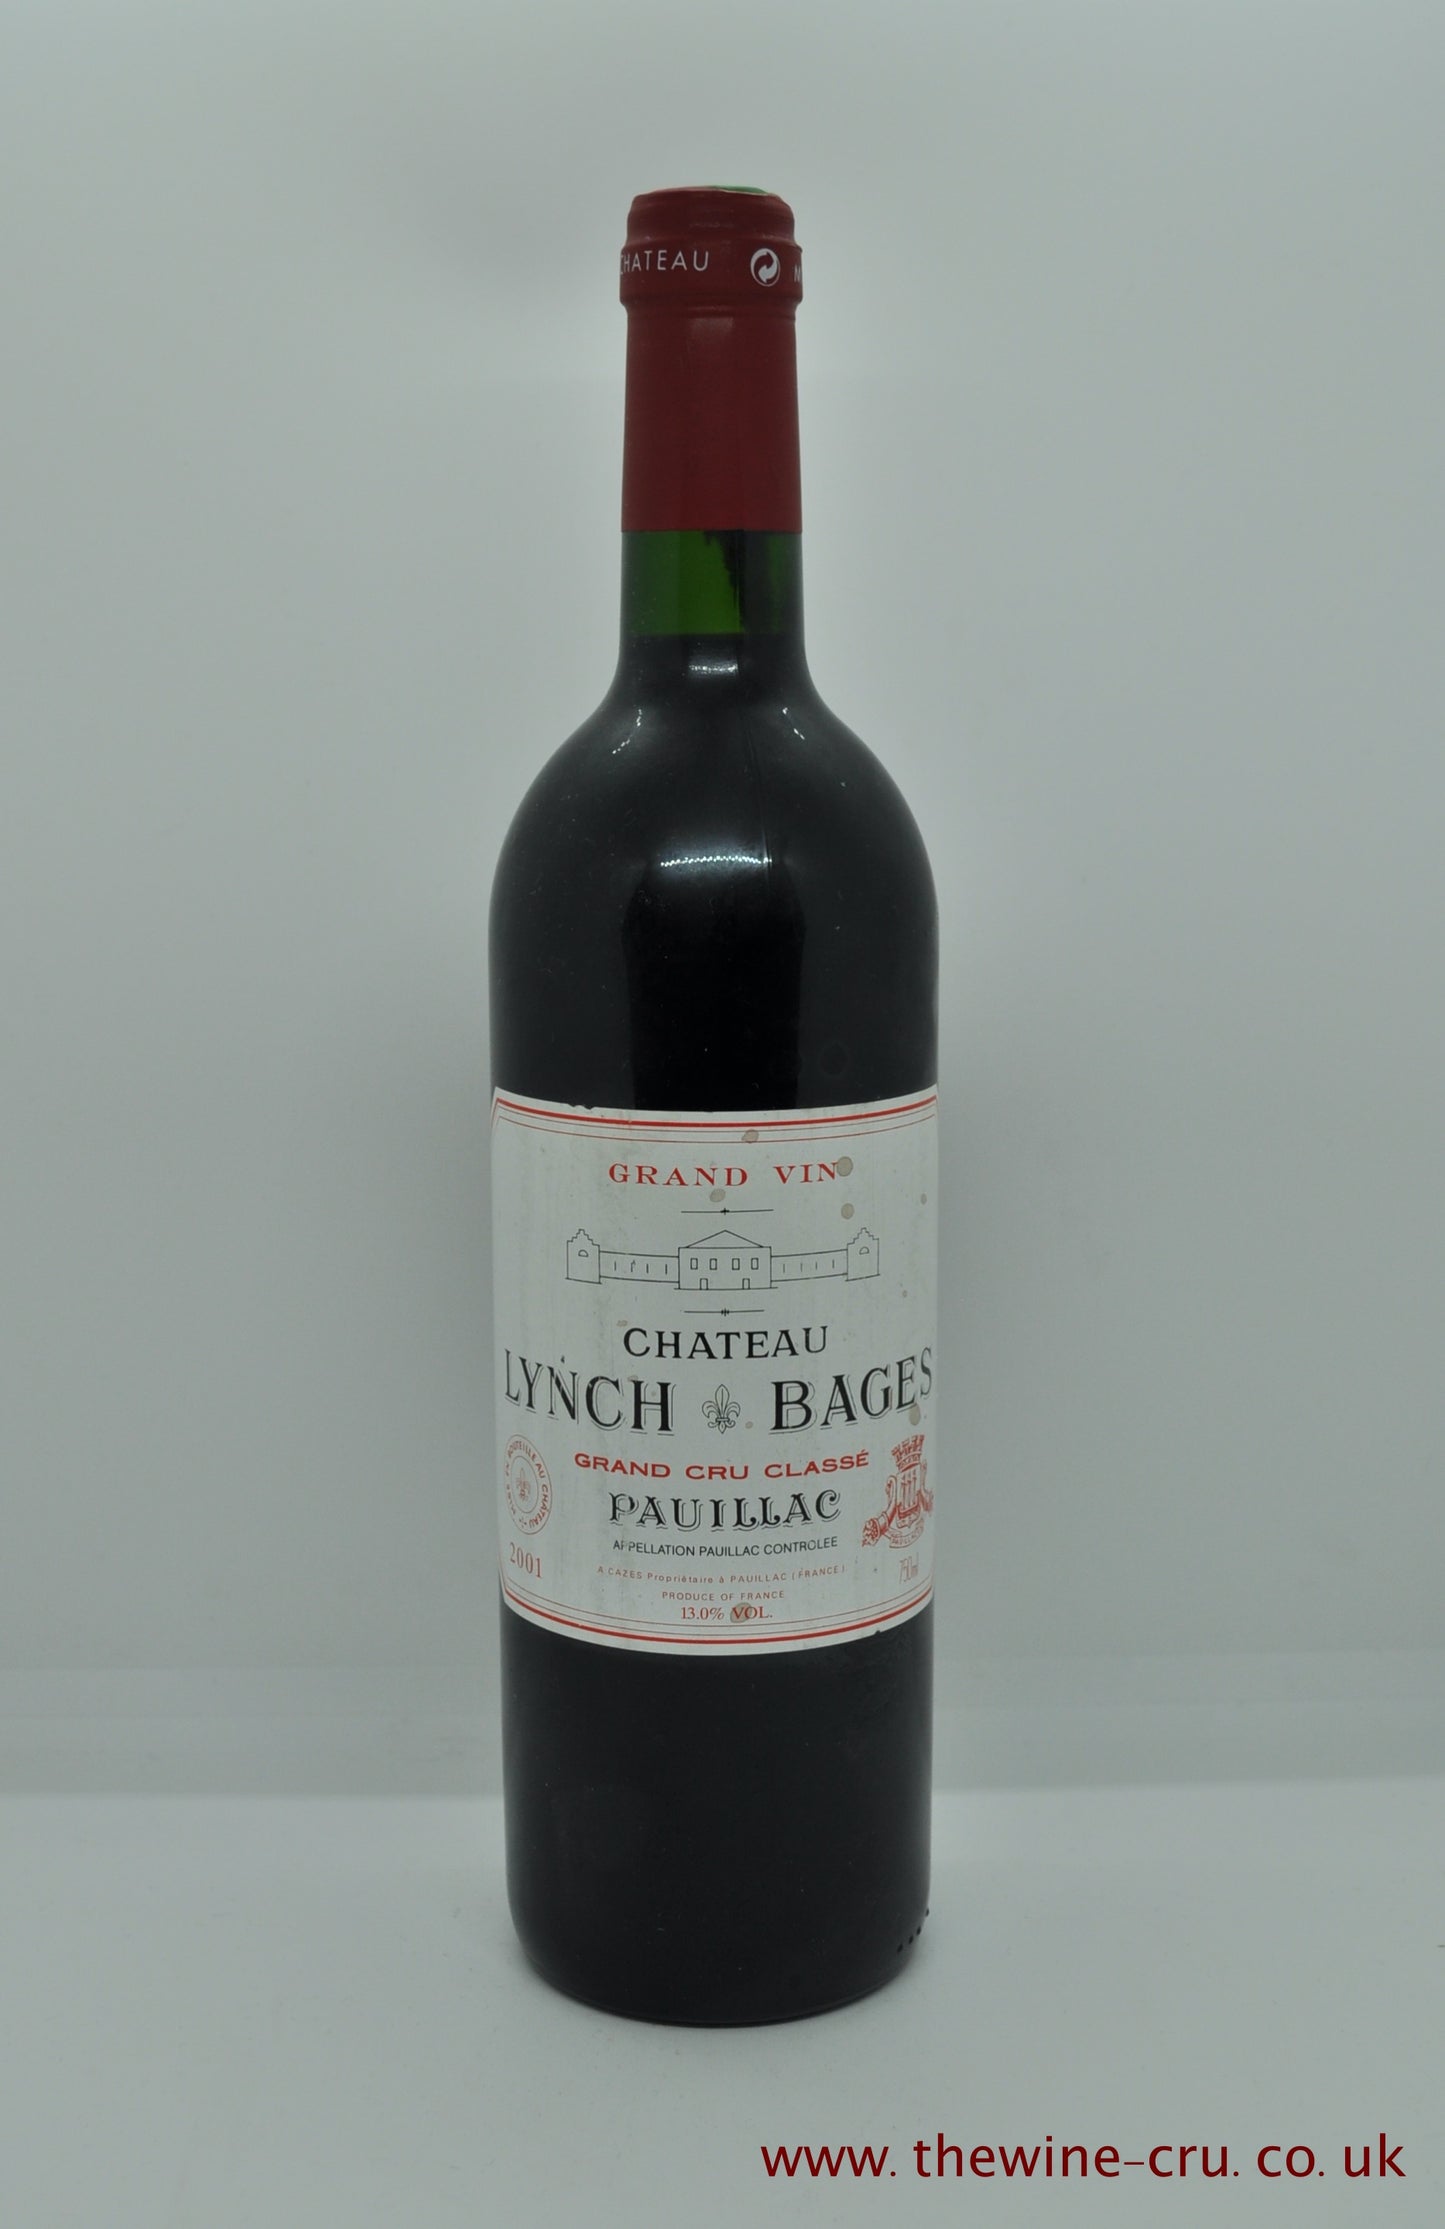 2001 vintage red wine. Chateau Lynch Bages 2001. France Bordeaux. Immediate delivery. Free local delivery. Gift wrapping available.